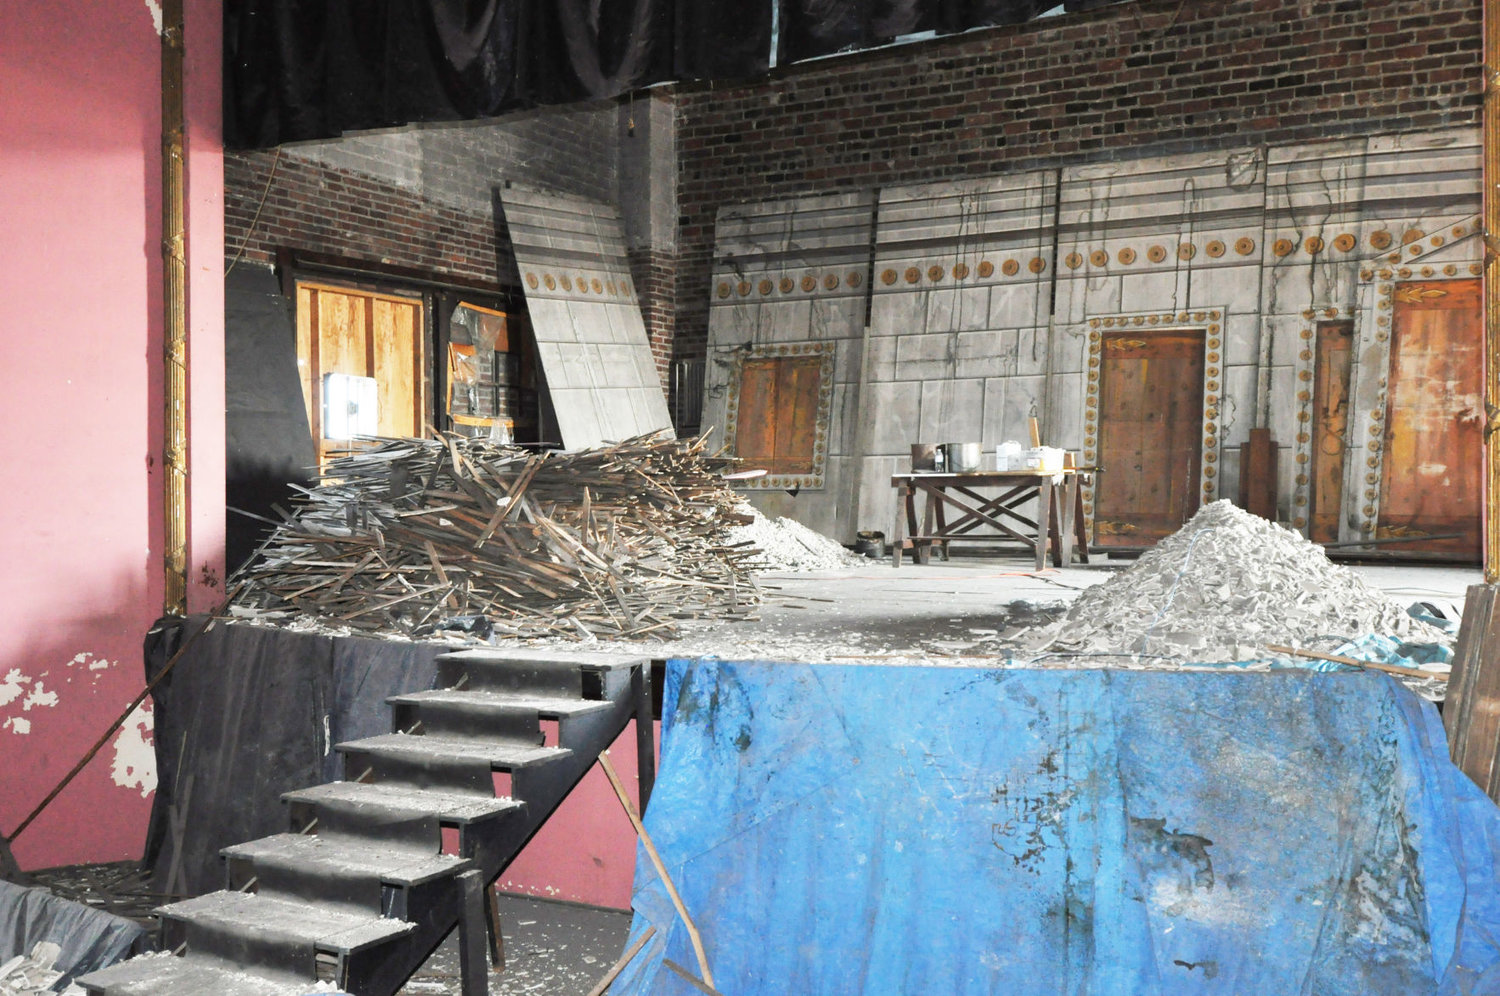 Piles of plaster and building material cover the stage of the Masonic Temple theater Wednesday. The temple is being restored by a non-profit preservation group.